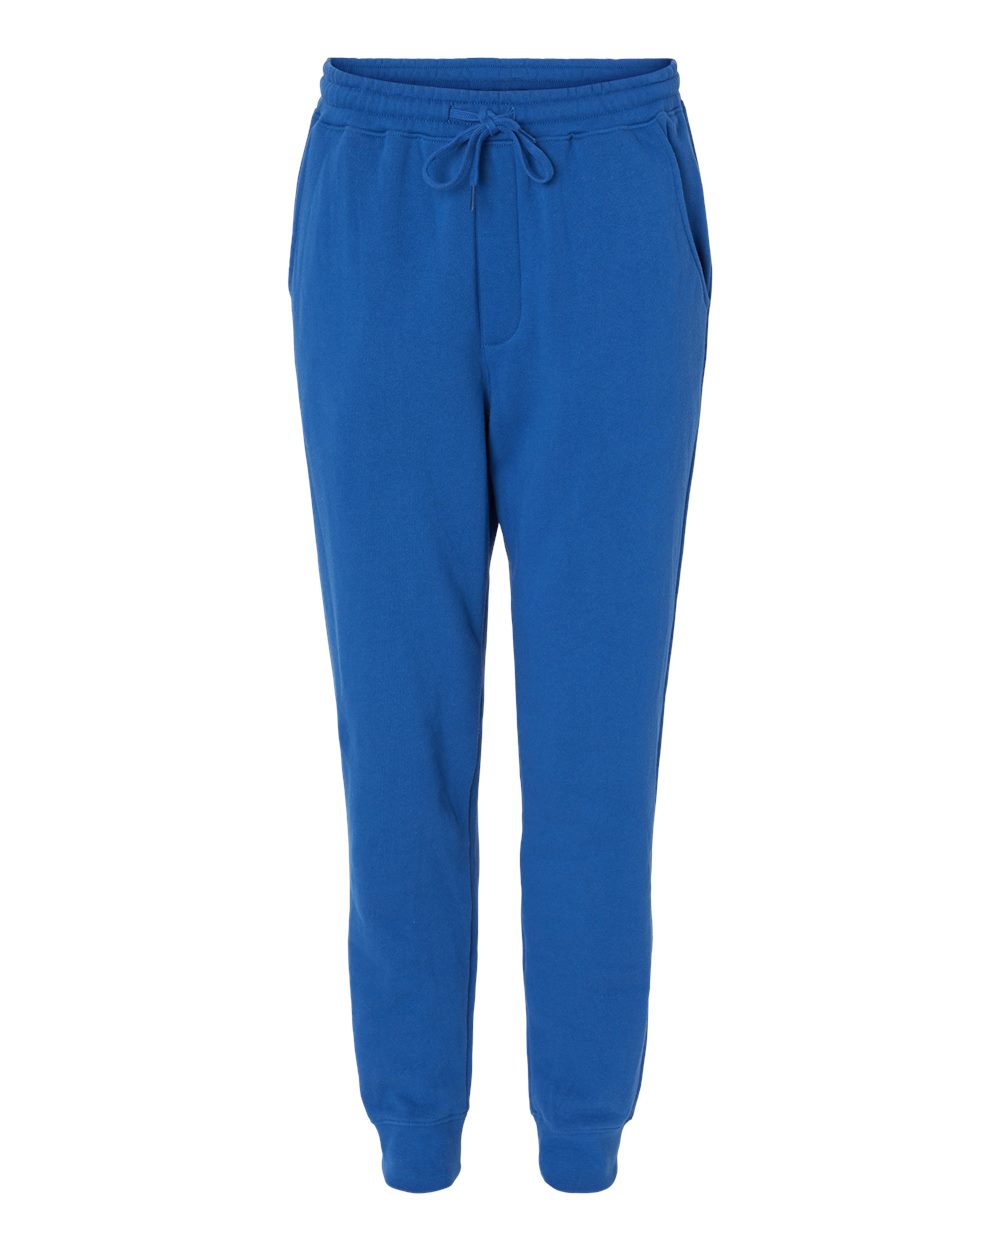 Independent Trading Co. Midweight Fleece Pants